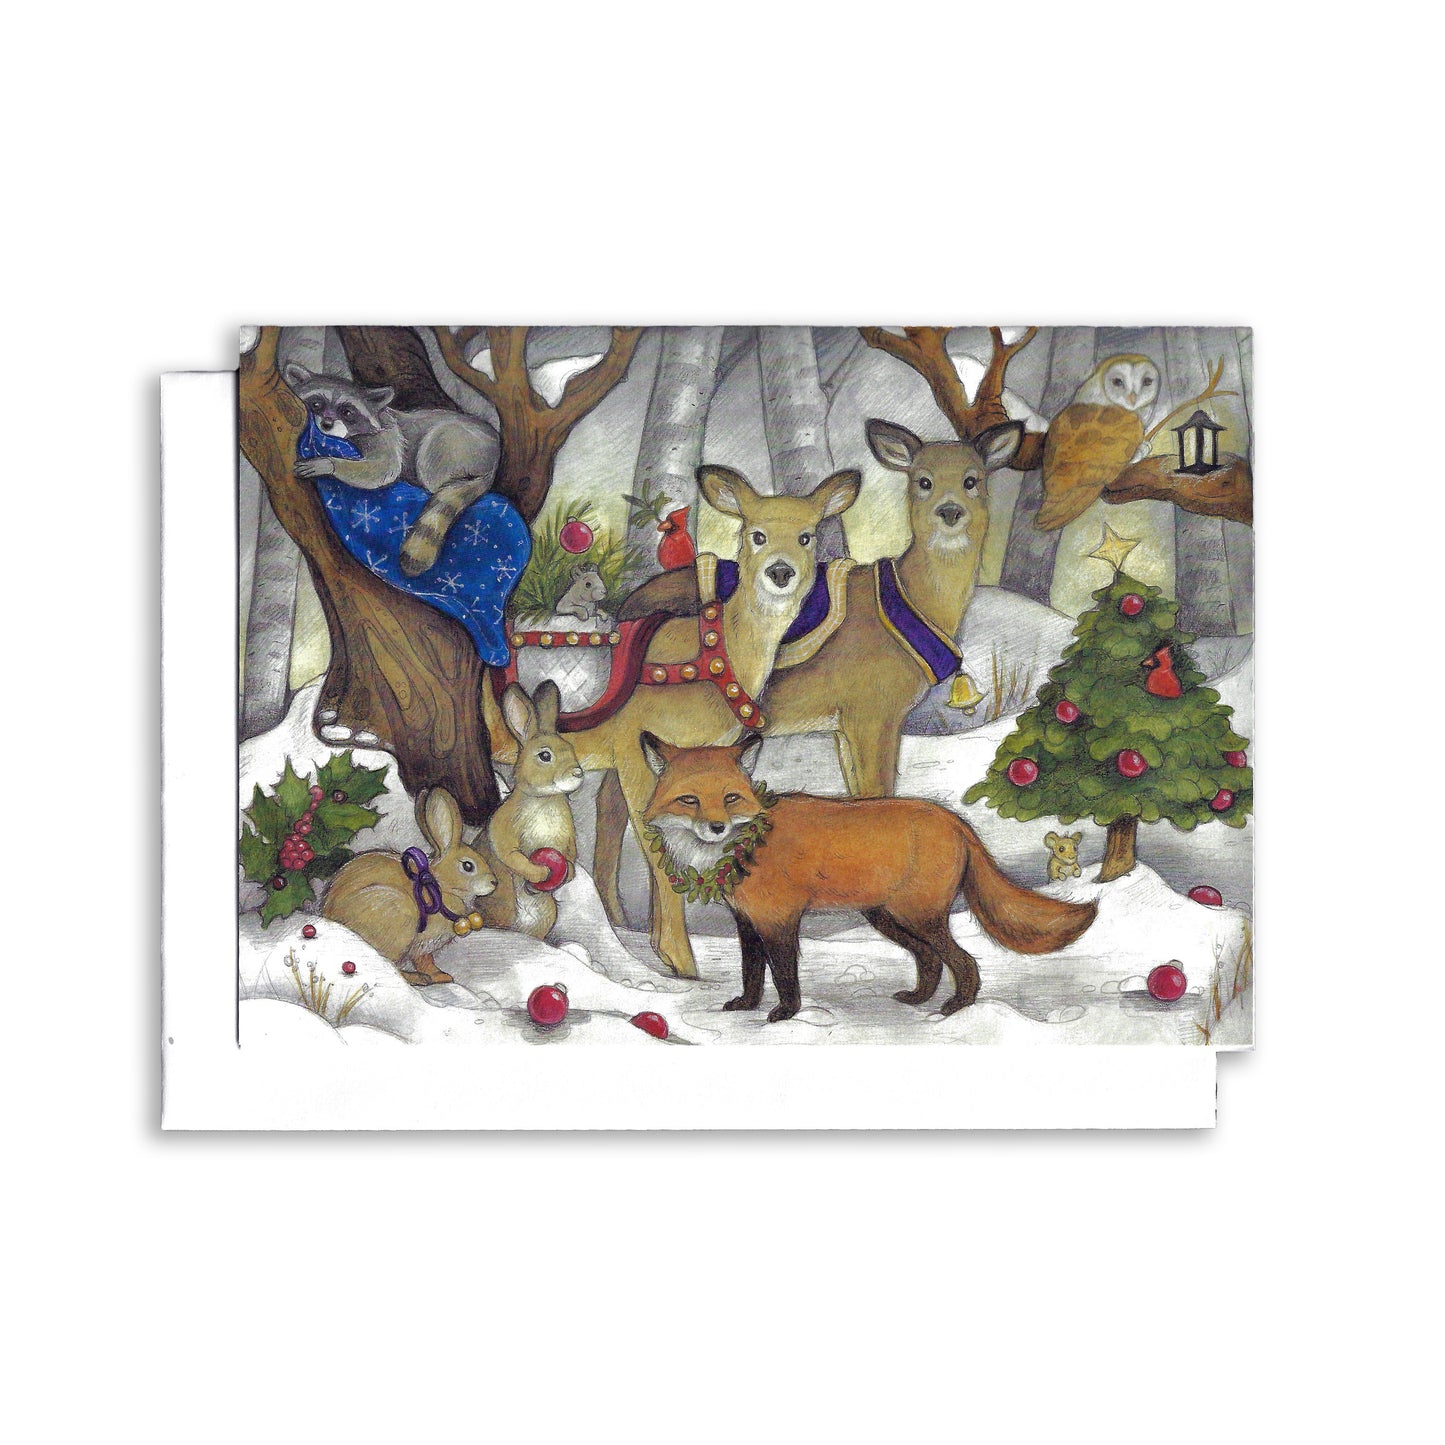 An illustrated Christmas card of animals coming together to celebrate in the forest. There are two deers, 2 rabbits, one fox, one raccoon, one owl, one mouse, one squirrel, one cardinal and one little christmas tree.